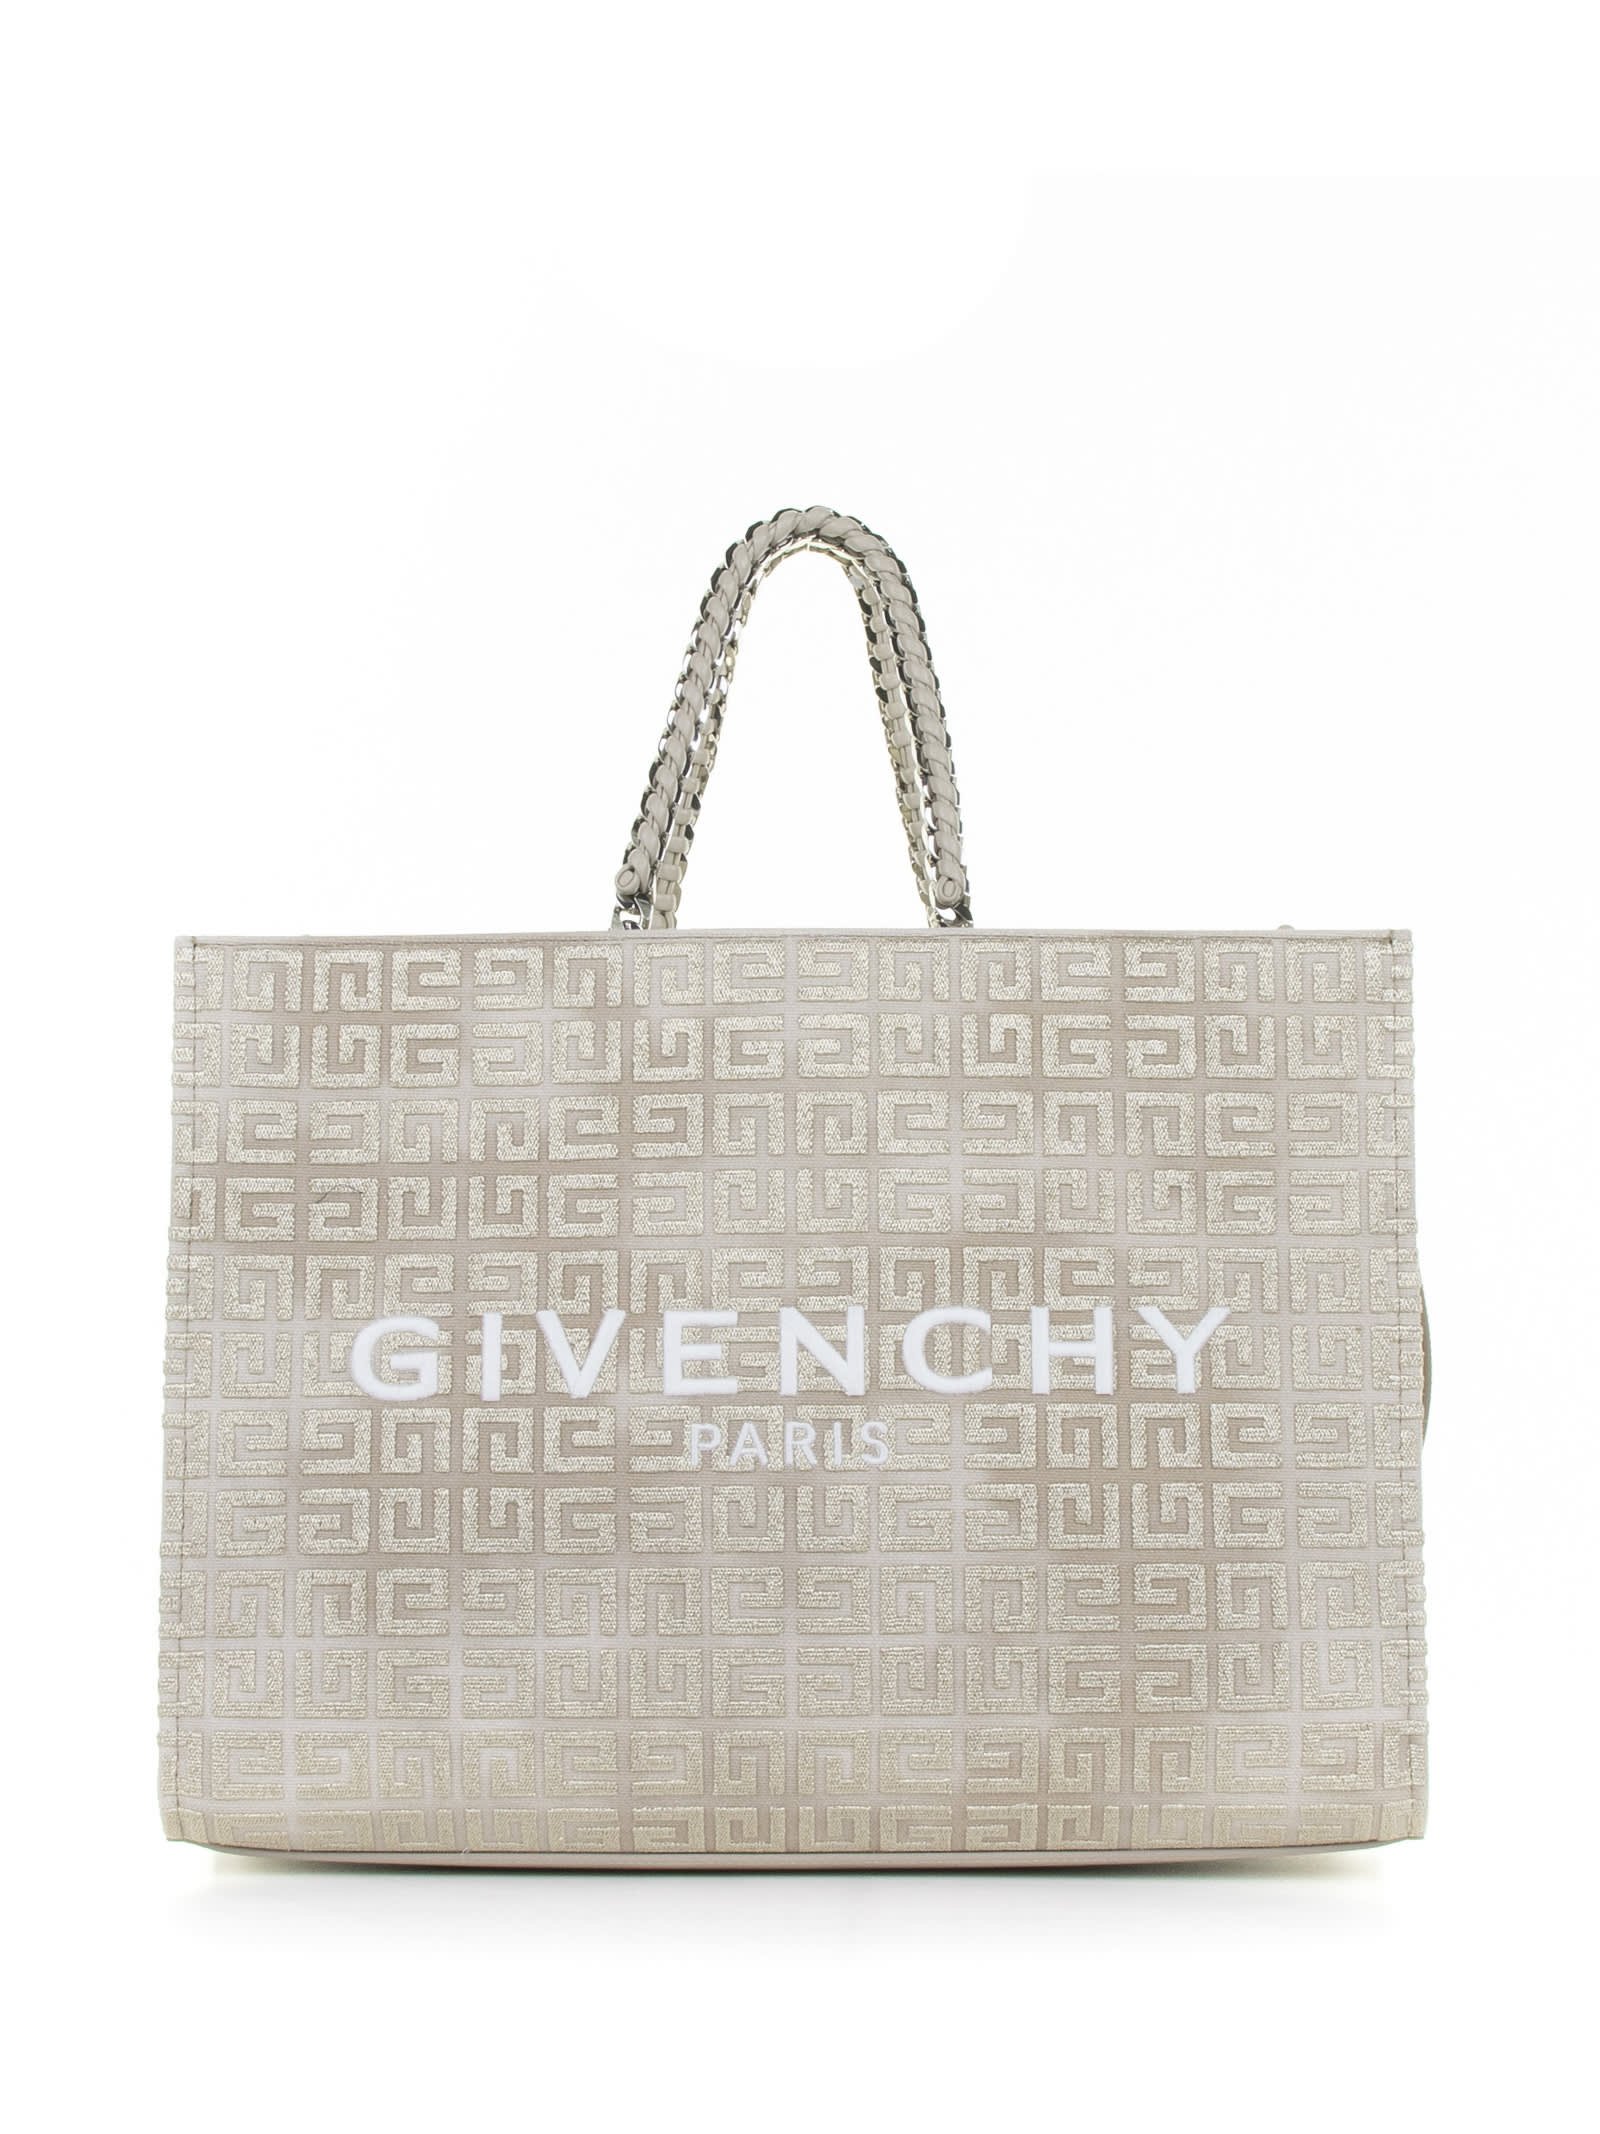 Givenchy Tote In Dusty Gold